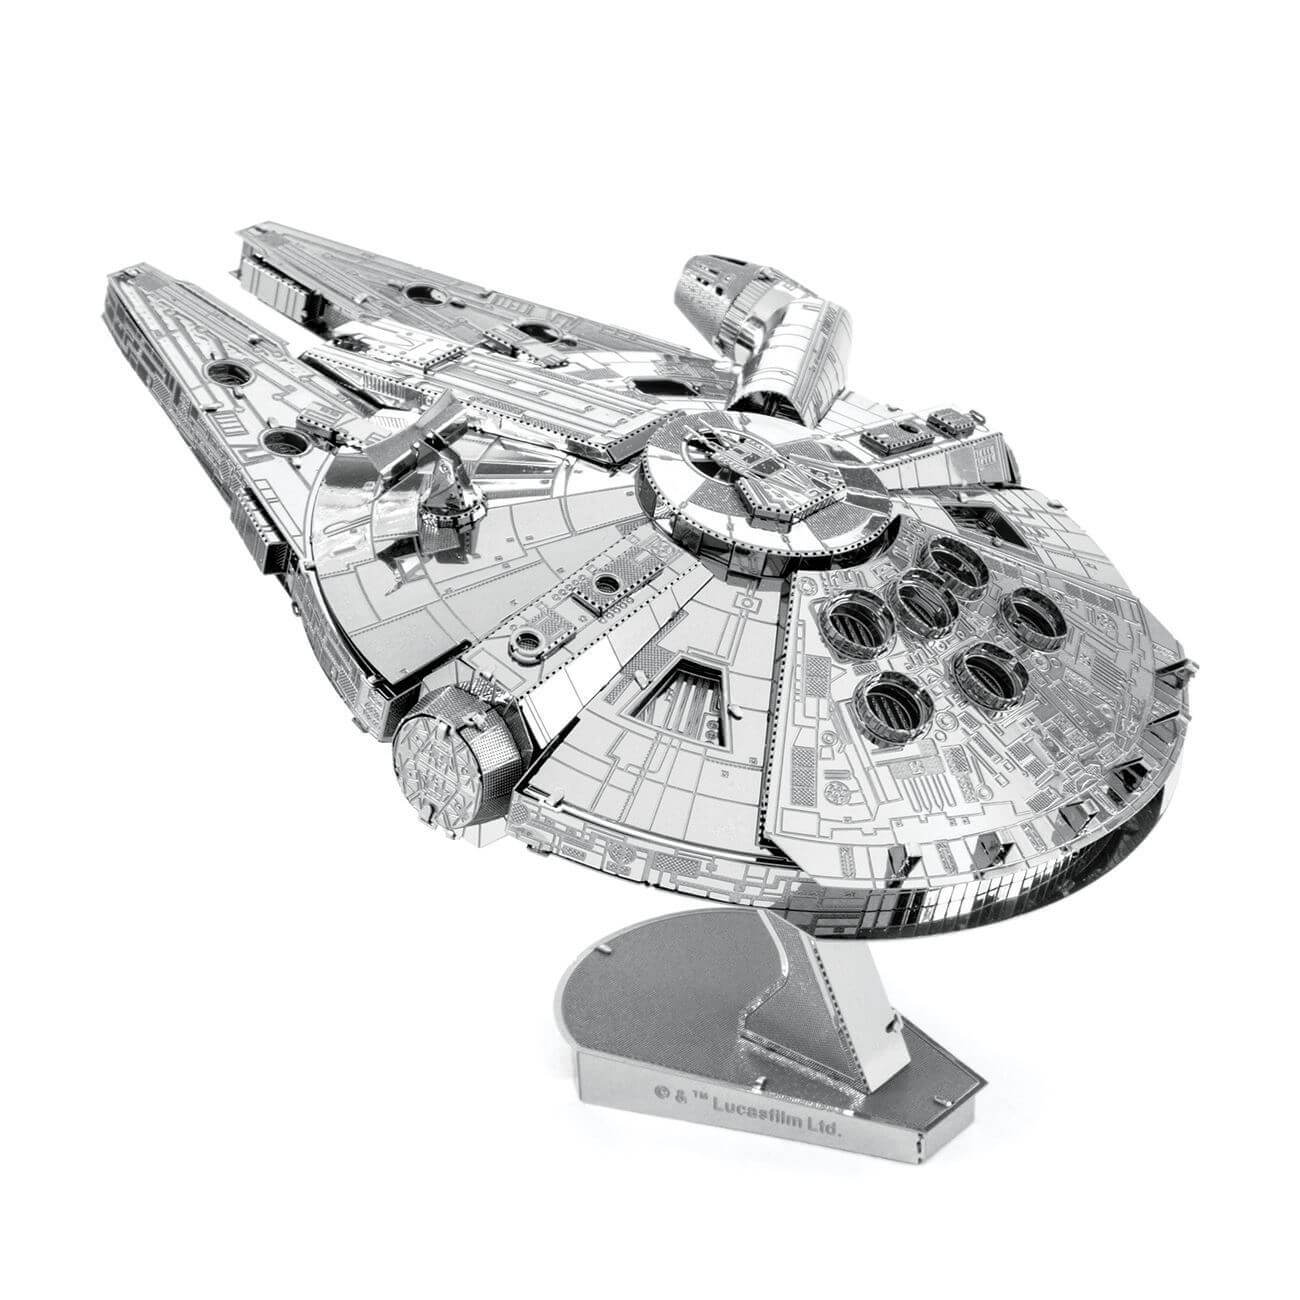 Back view of the Metal Earth Premium Iconx Star Wars Millennium Falcon - 2 Sheets.